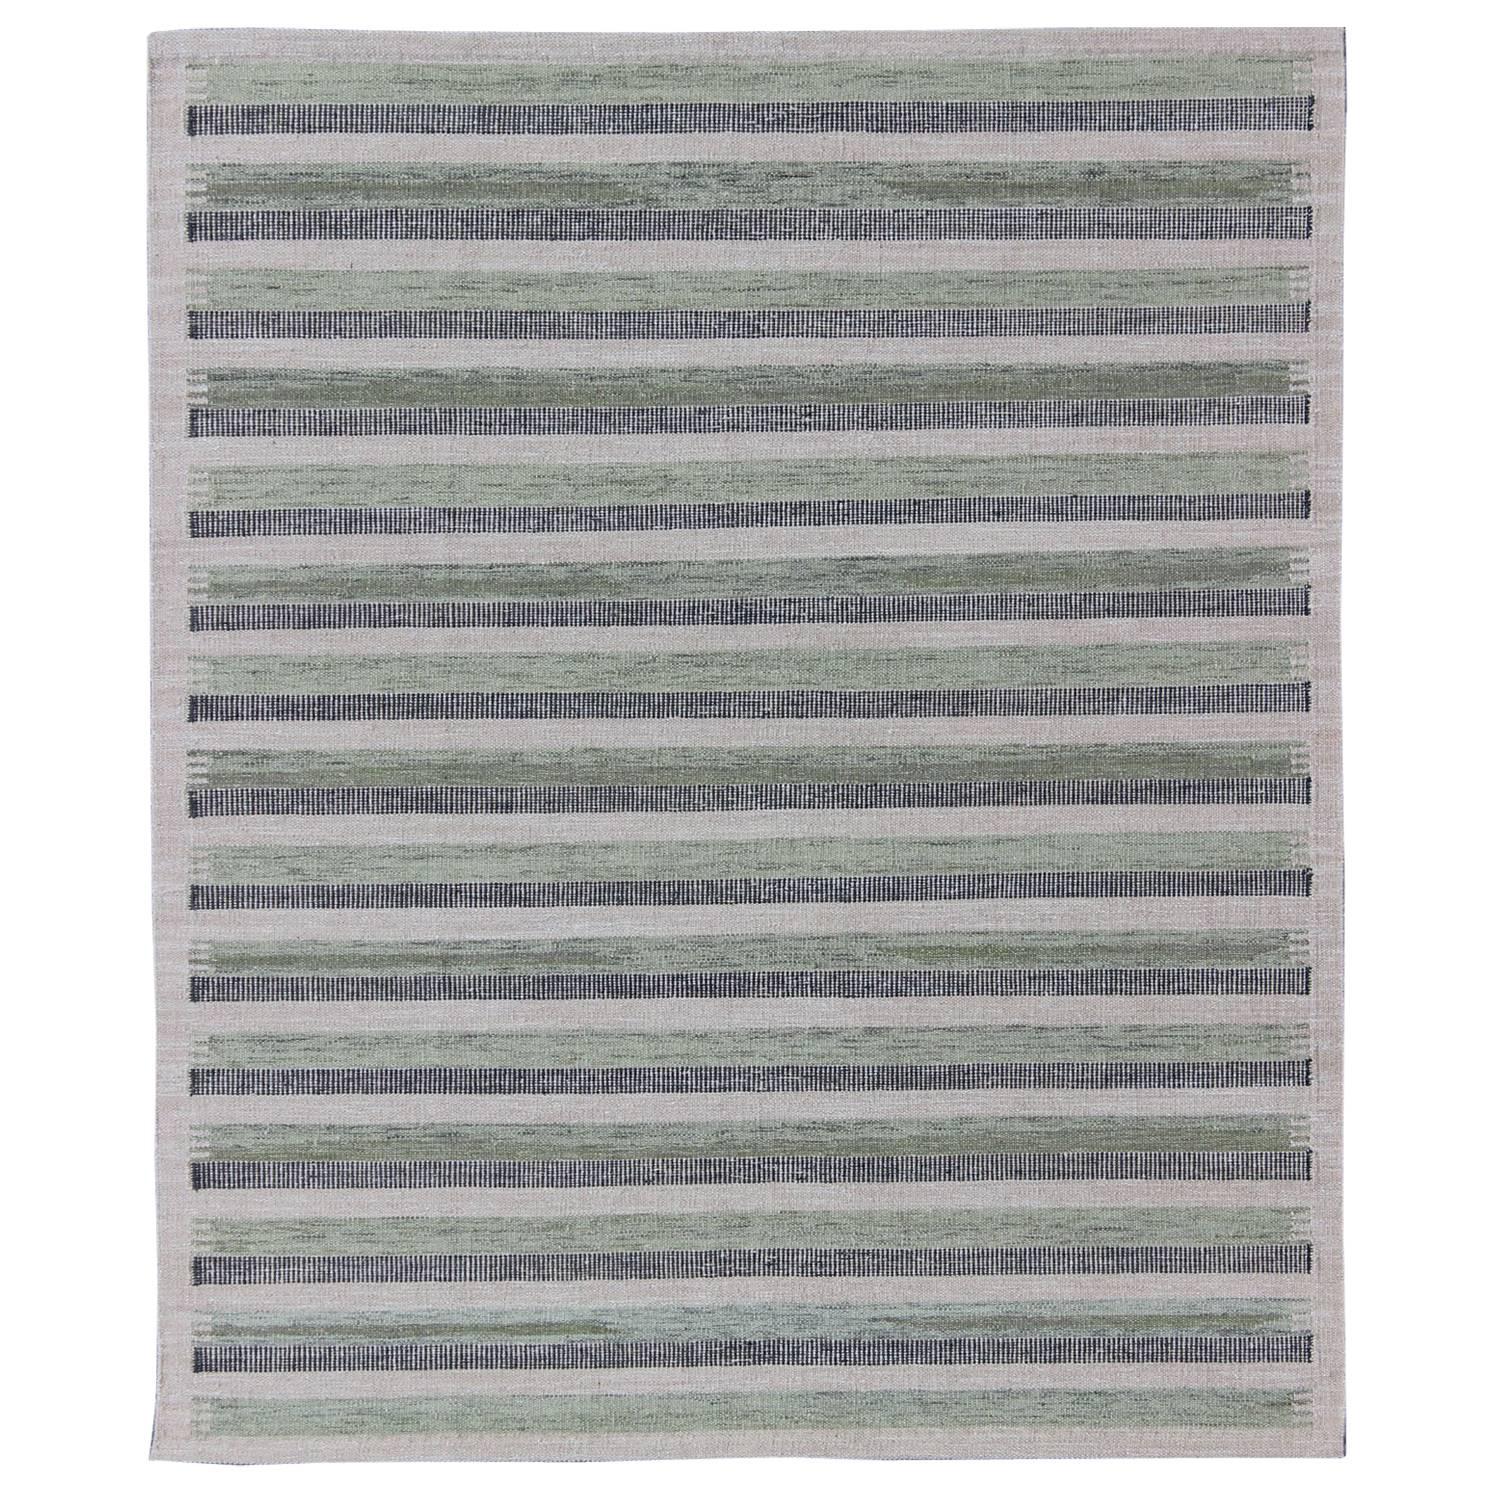 Scandinavian Design Flat-Weave Rug with Striped Design in Charcoal and Green